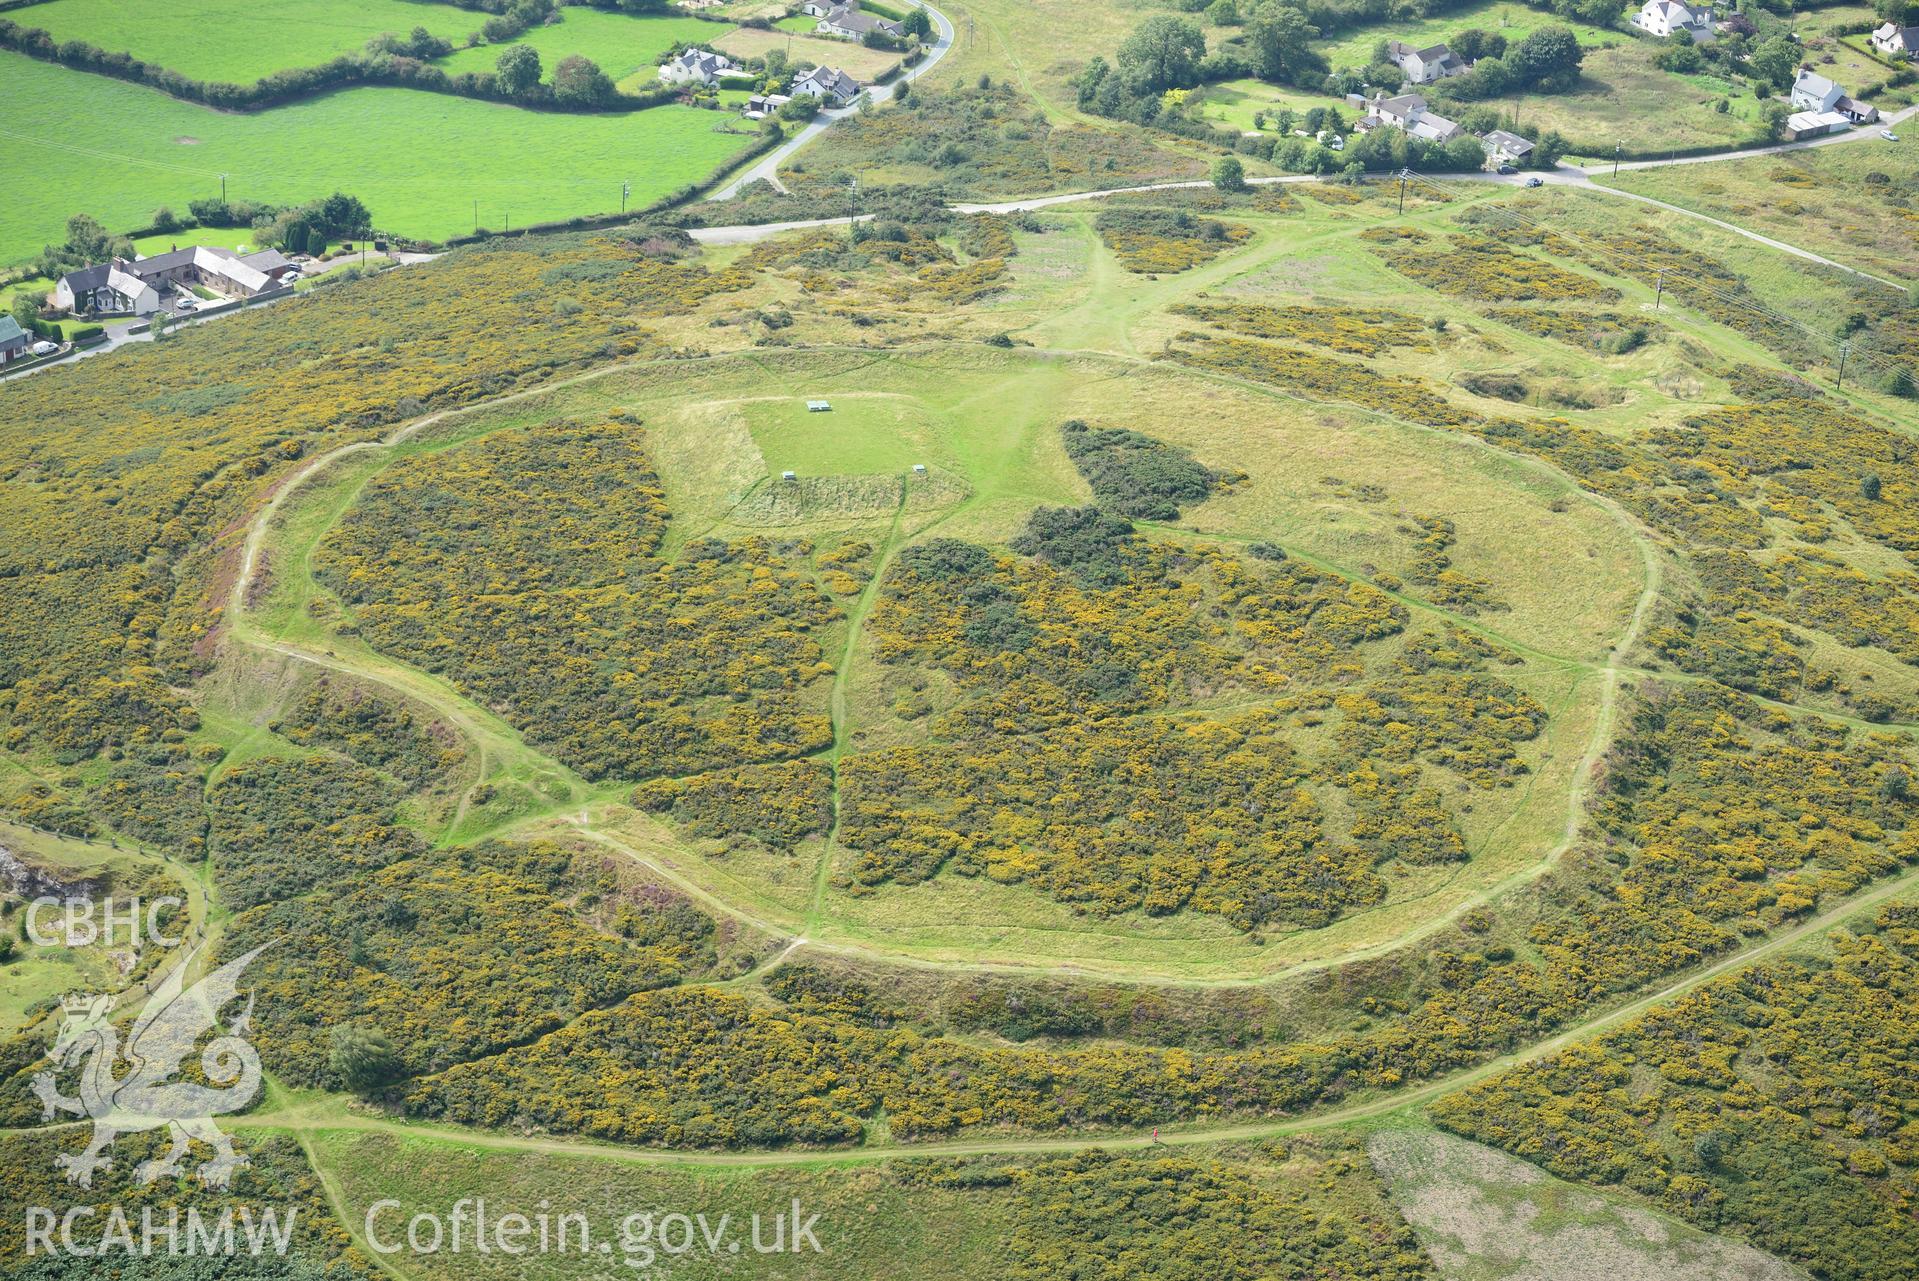 Moel-y-Gaer camp or hill top enclosure, Halkyn. Oblique aerial photograph taken during the Royal Commission's programme of archaeological aerial reconnaissance by Toby Driver on 11th September 2015.